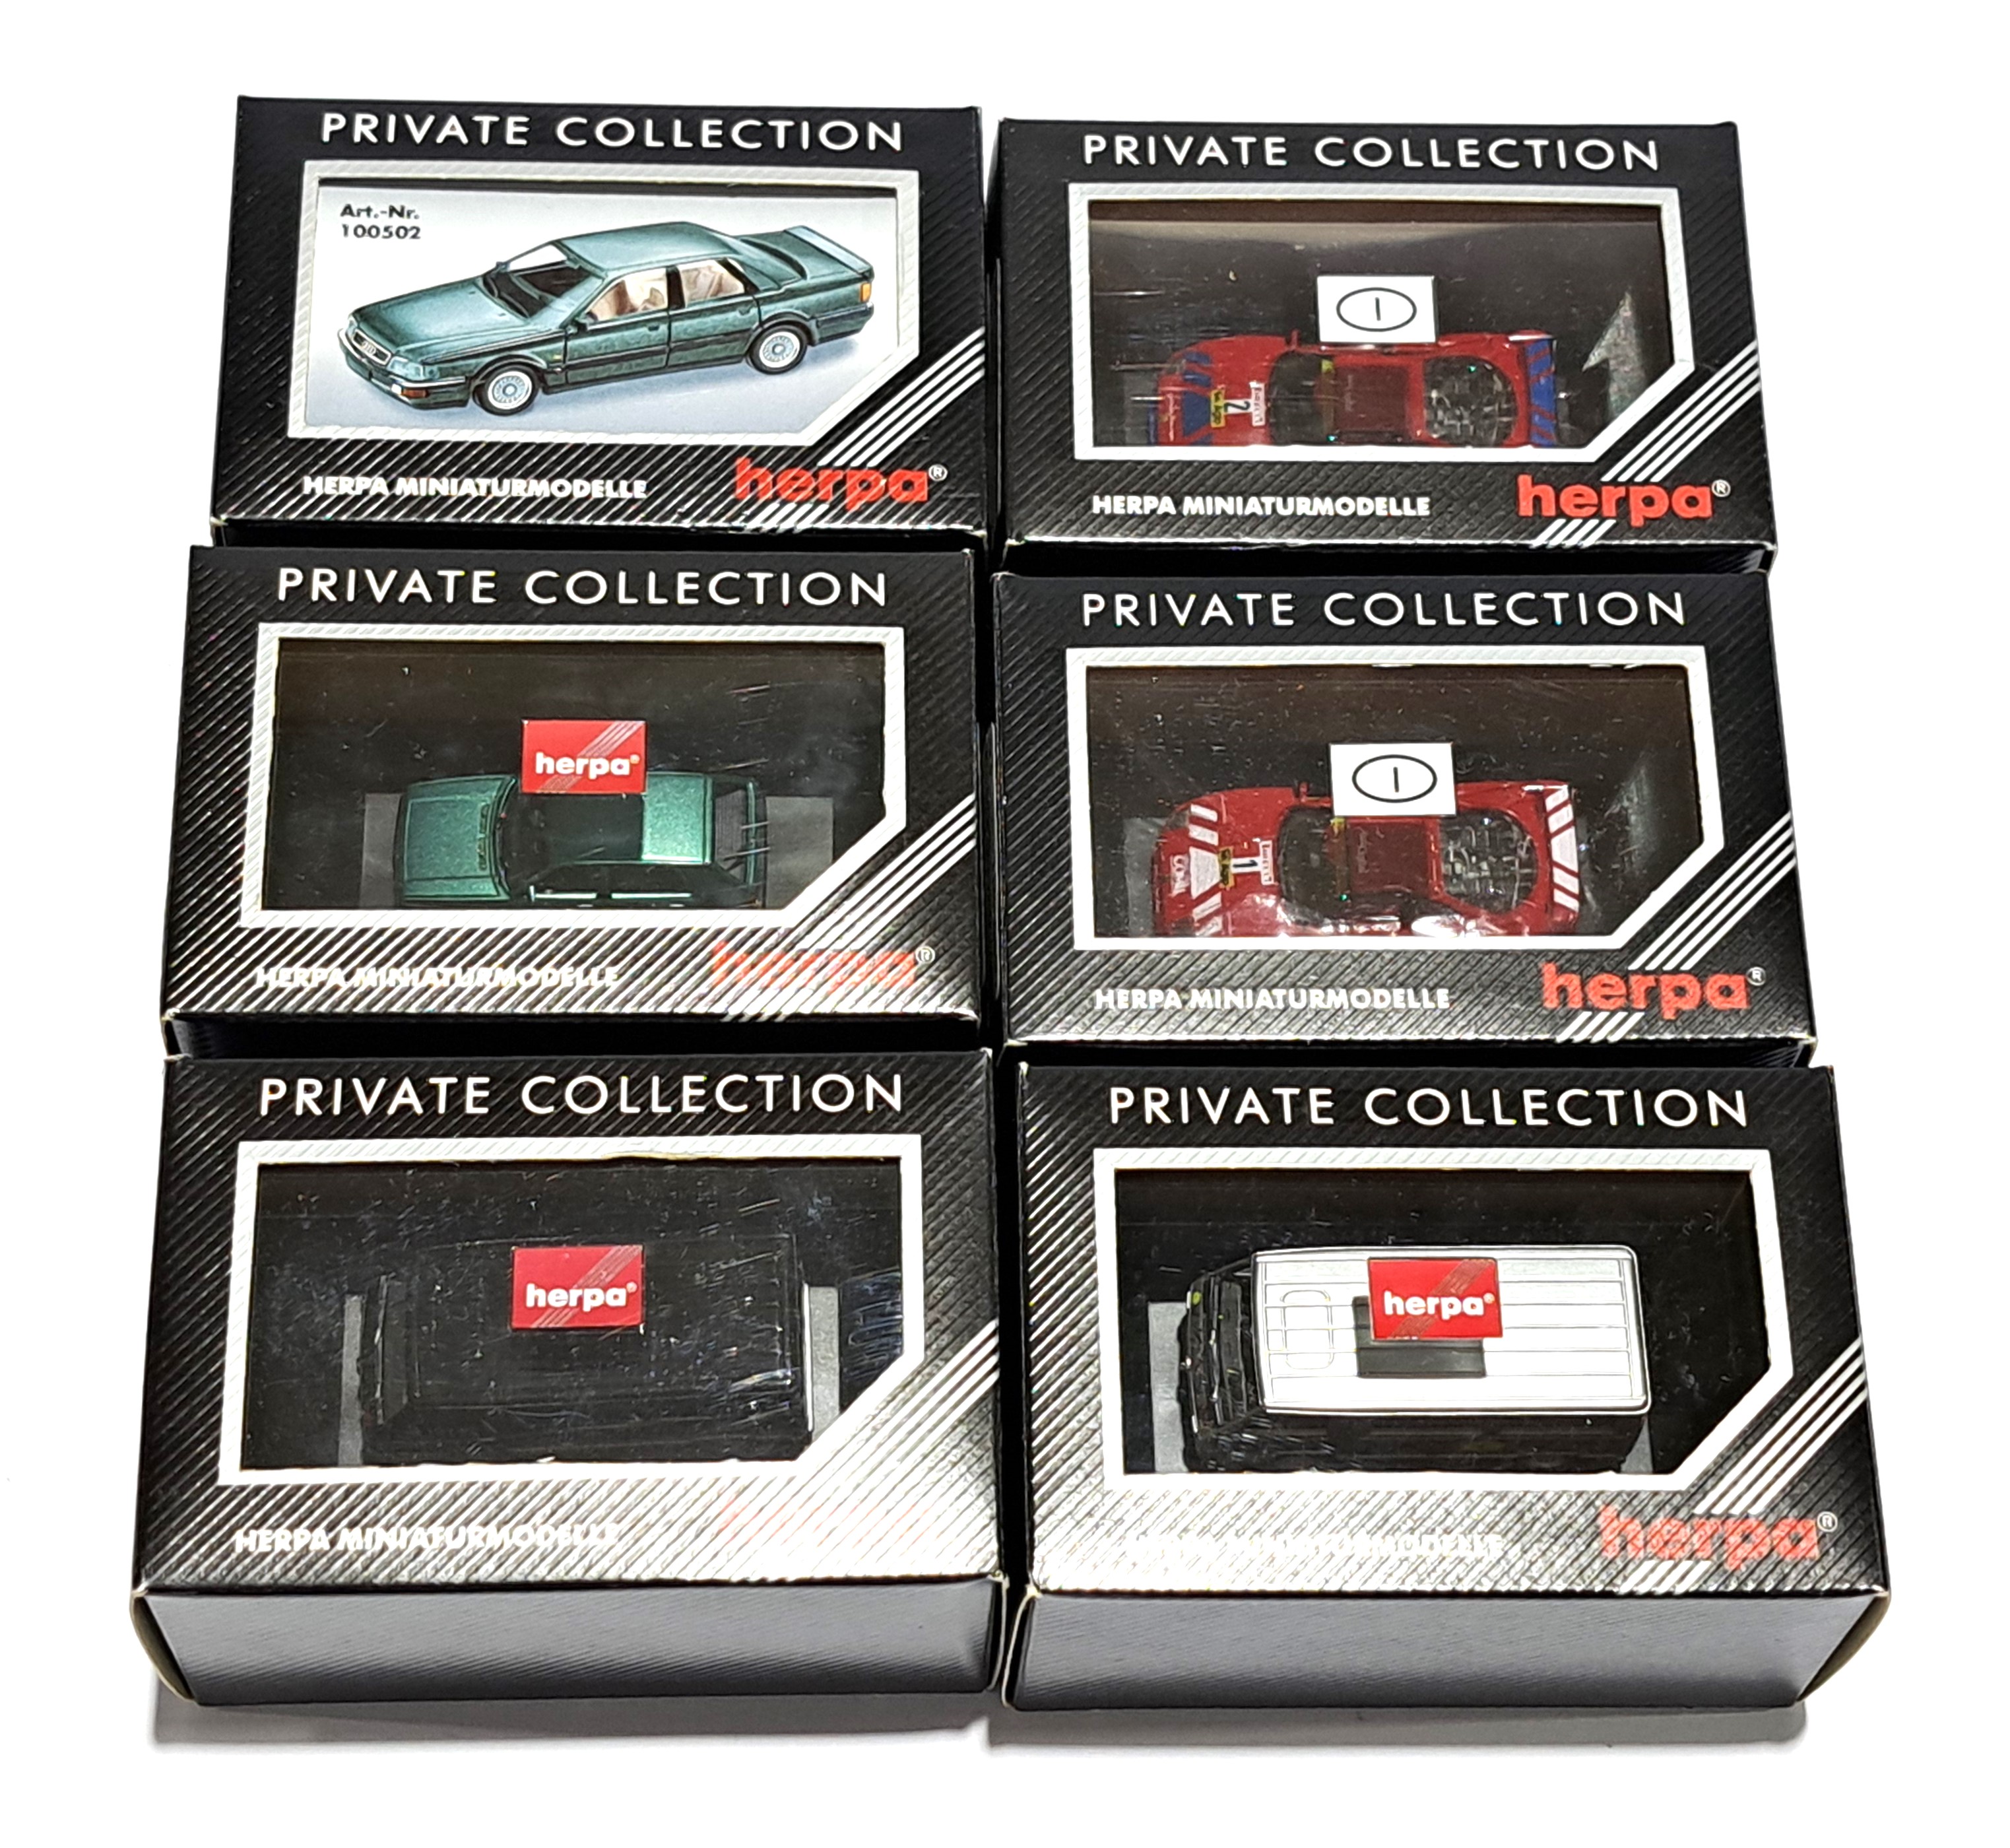 Herpa "Private Collection" & "Exclusiv Serie" and similar 1/87 scale diecast cars - Image 4 of 4